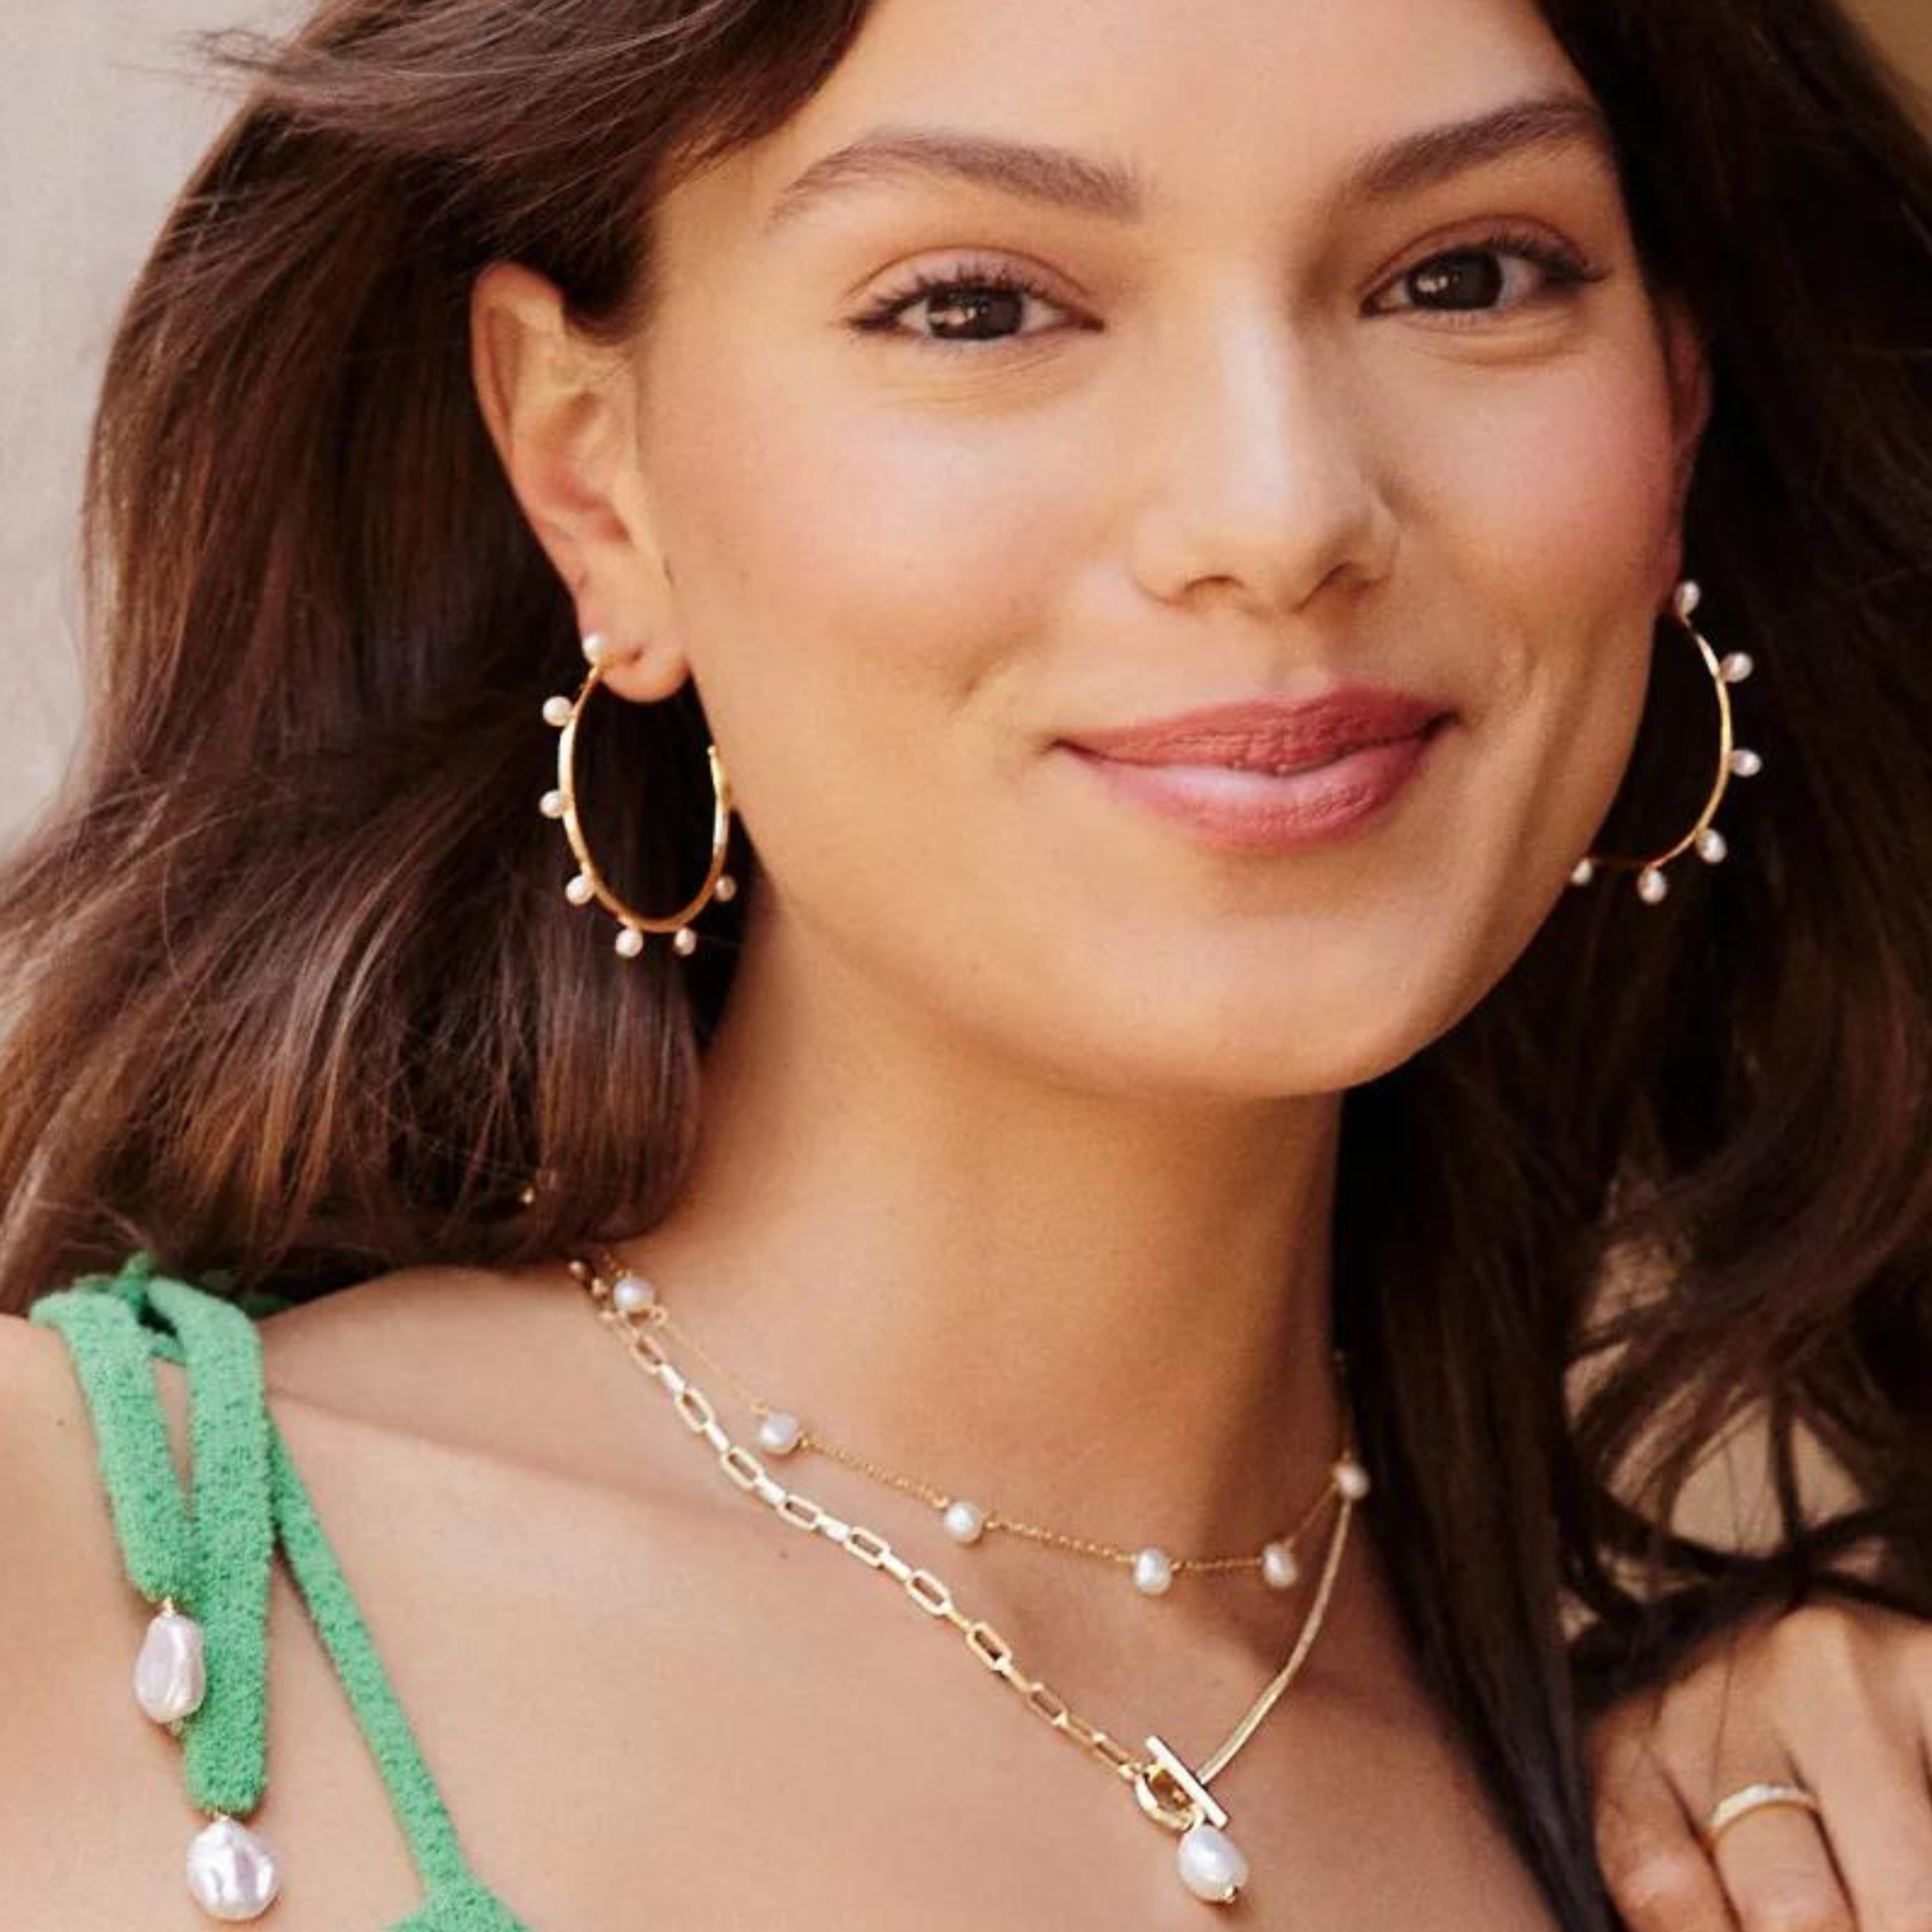 Kendra Scott | Leighton Gold Pearl Hoop Earrings in White Pearl - Giddy Up Glamour Boutique